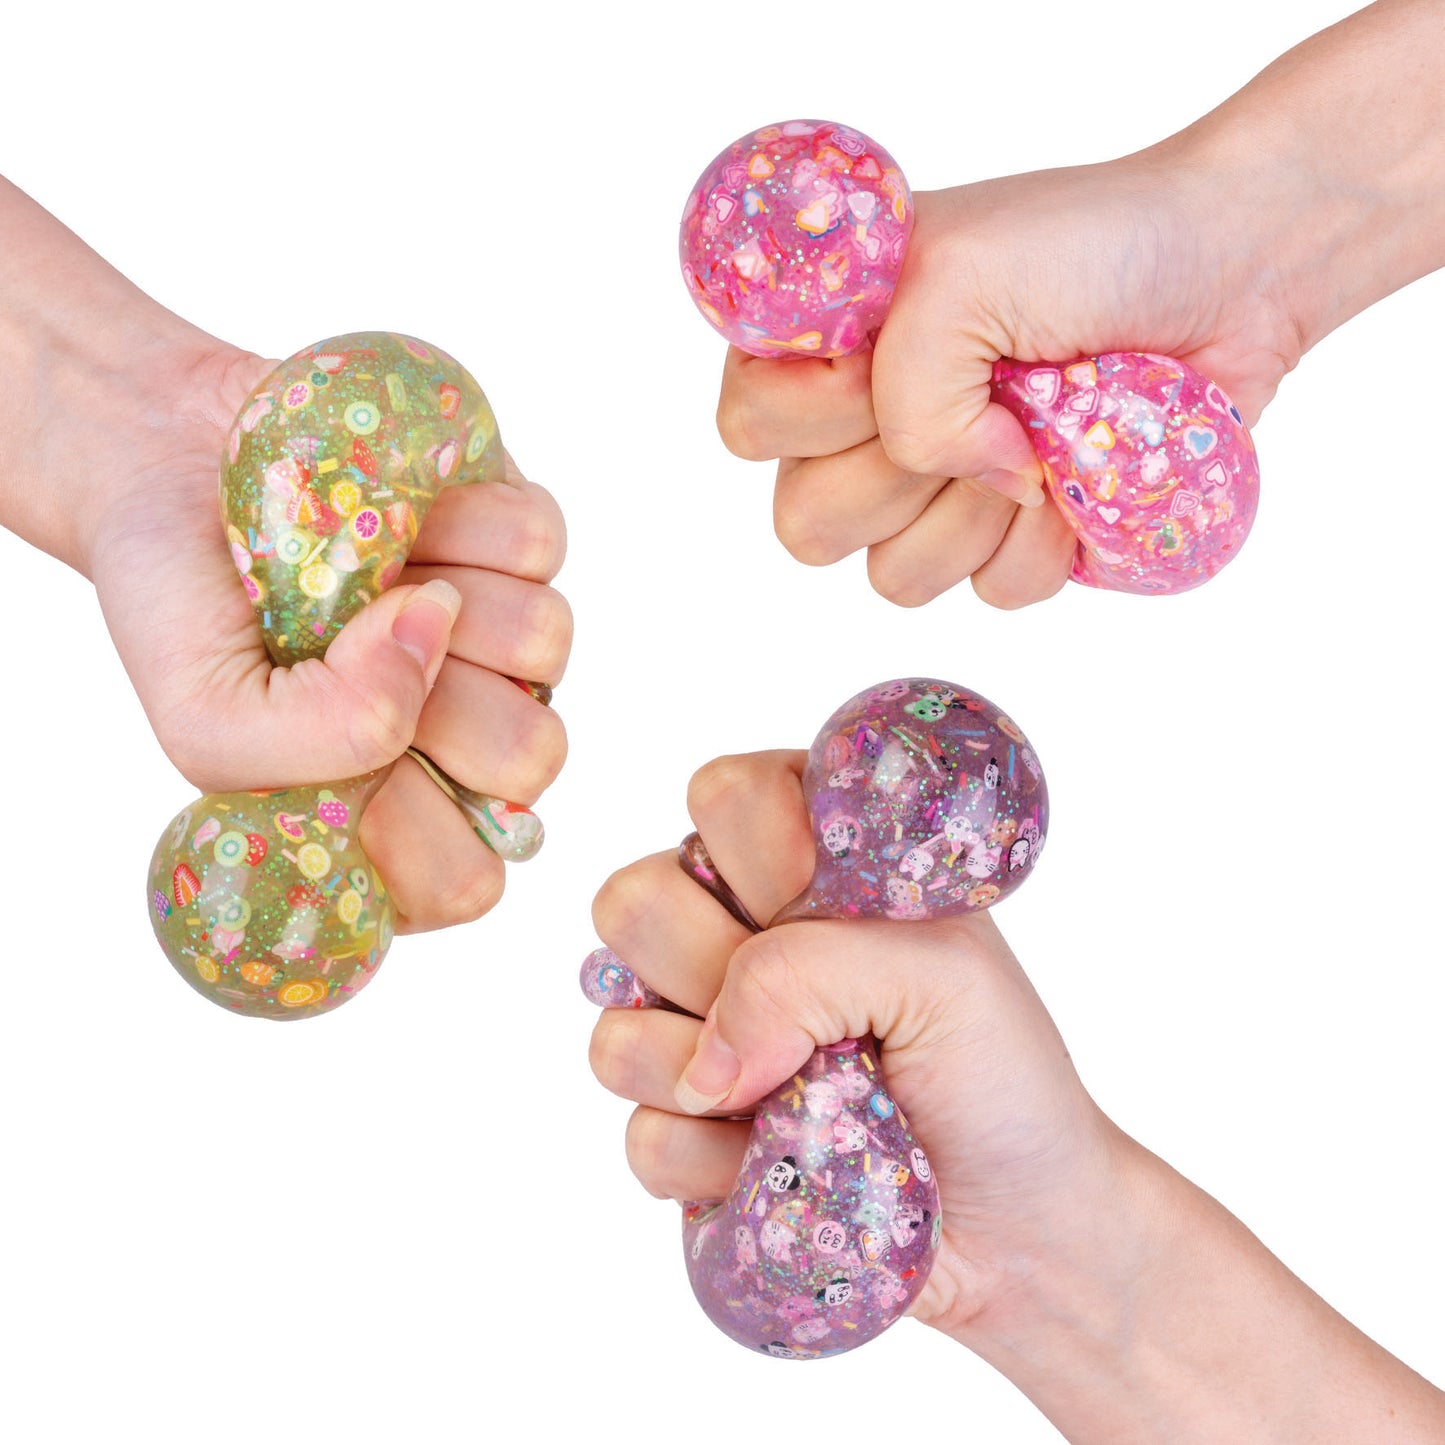 Smooshos Glitter Mix Ball - Sparkling Sensory Toy for Relaxation and Exploration